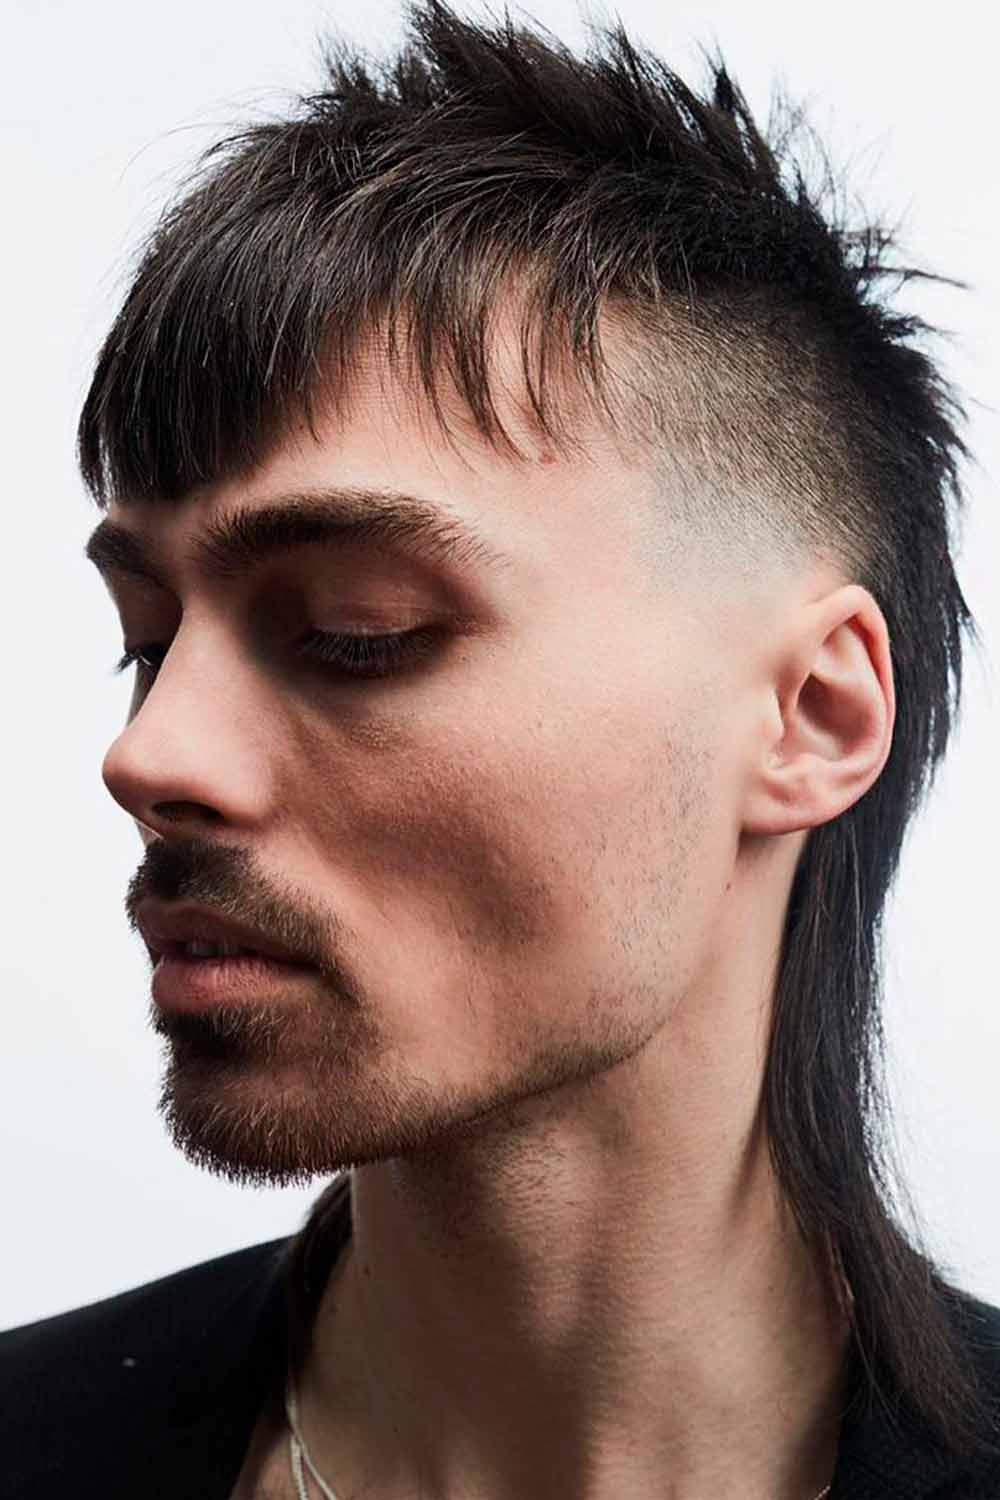 What Is A Mullet Fade #mullet #mullethaircut #mulletfade #fadedmullet